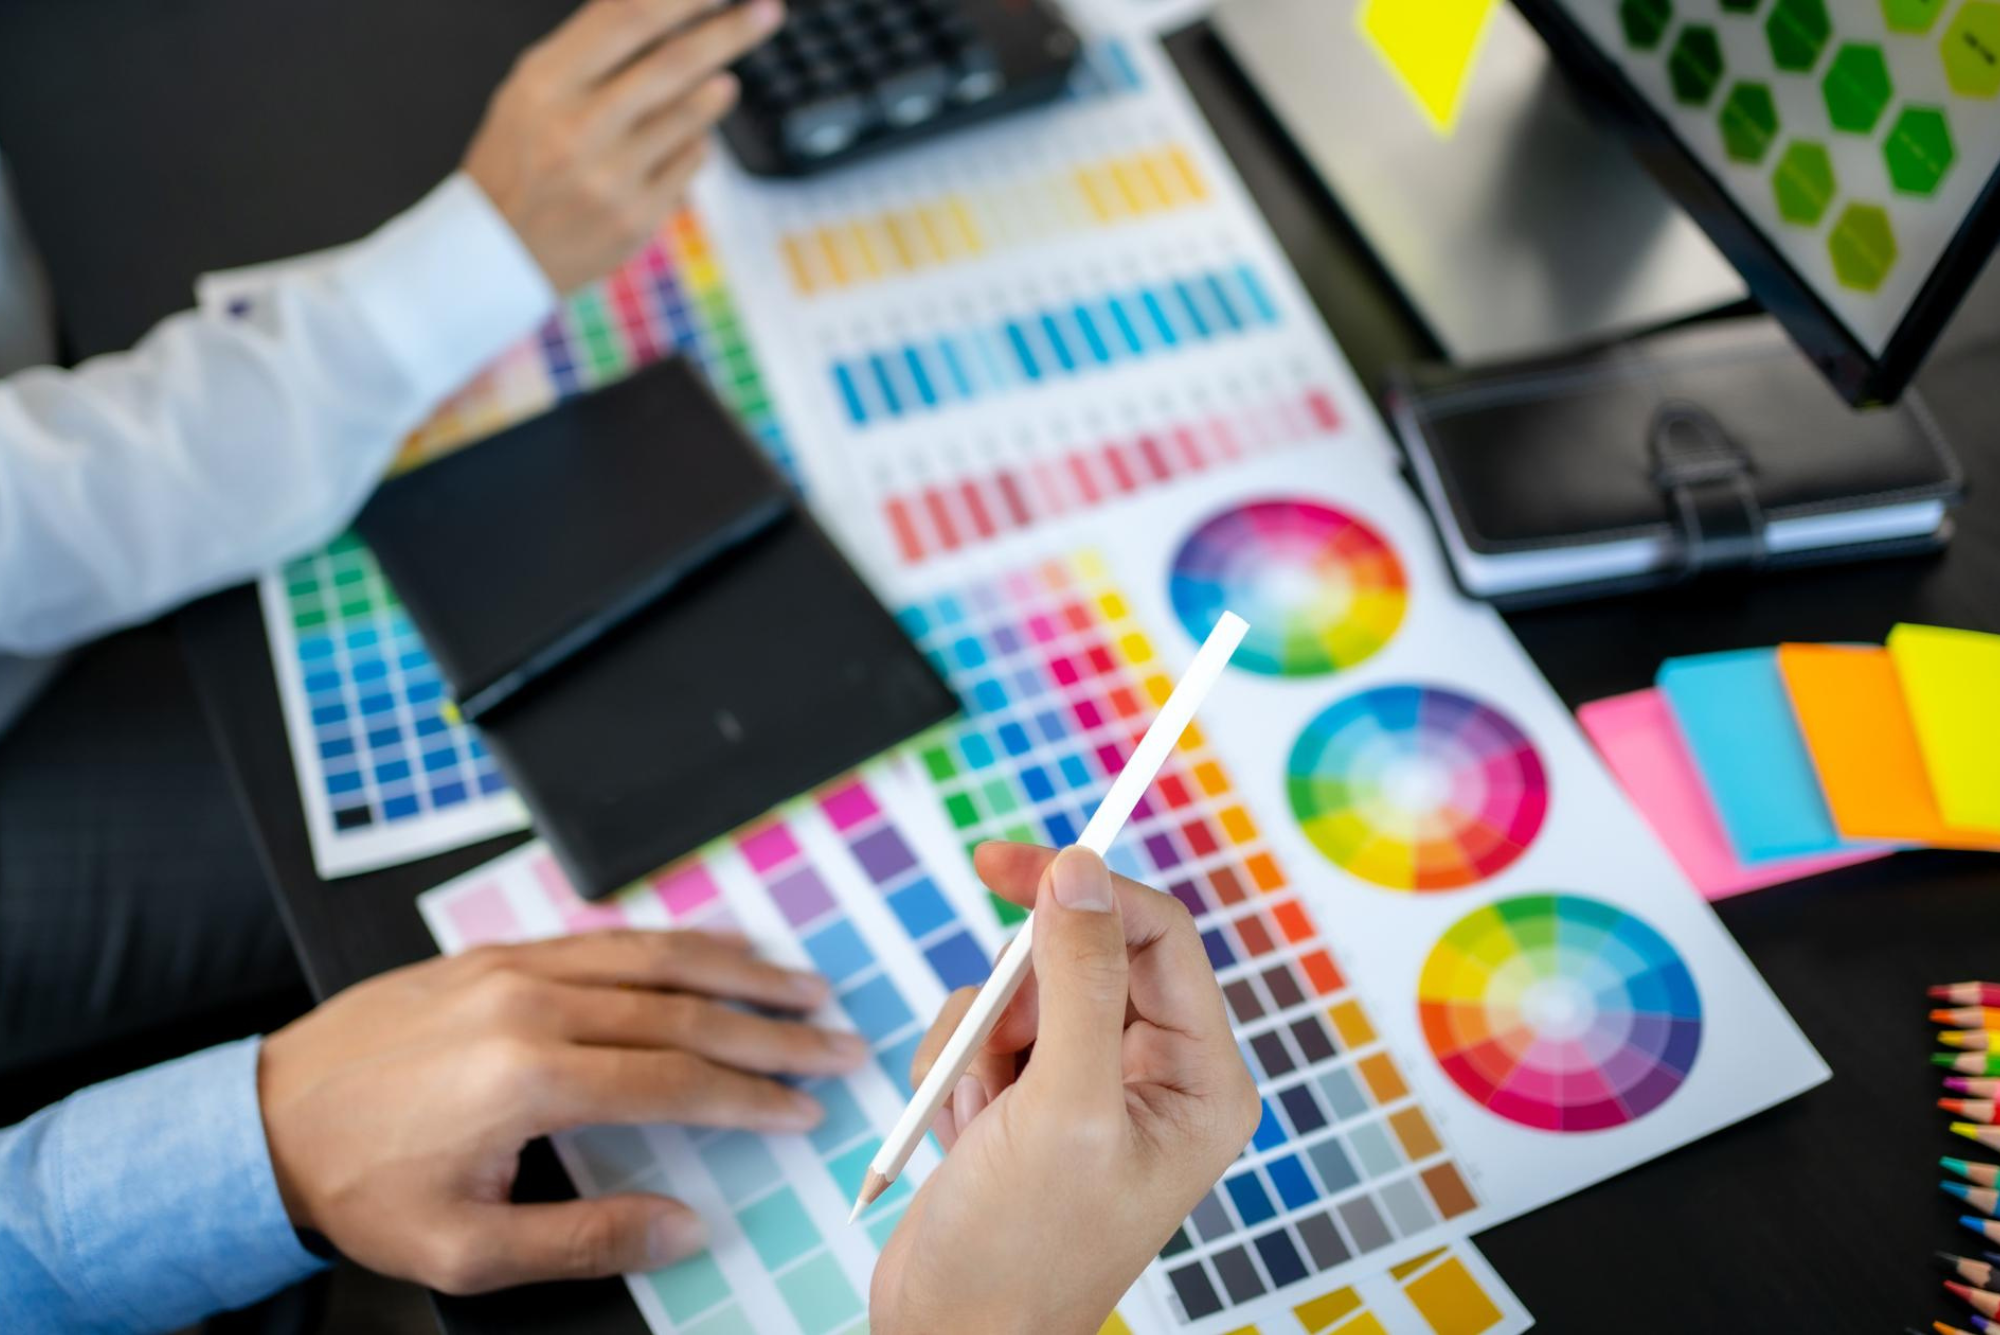 Learn the differences between CMYK and Spot Color Printing as printing methods in the world of design and branding. Discover the difference between CMYK’s four-color process and its versatility for full-color printing, contrasted with the precision and vibrancy of spot color printing. 